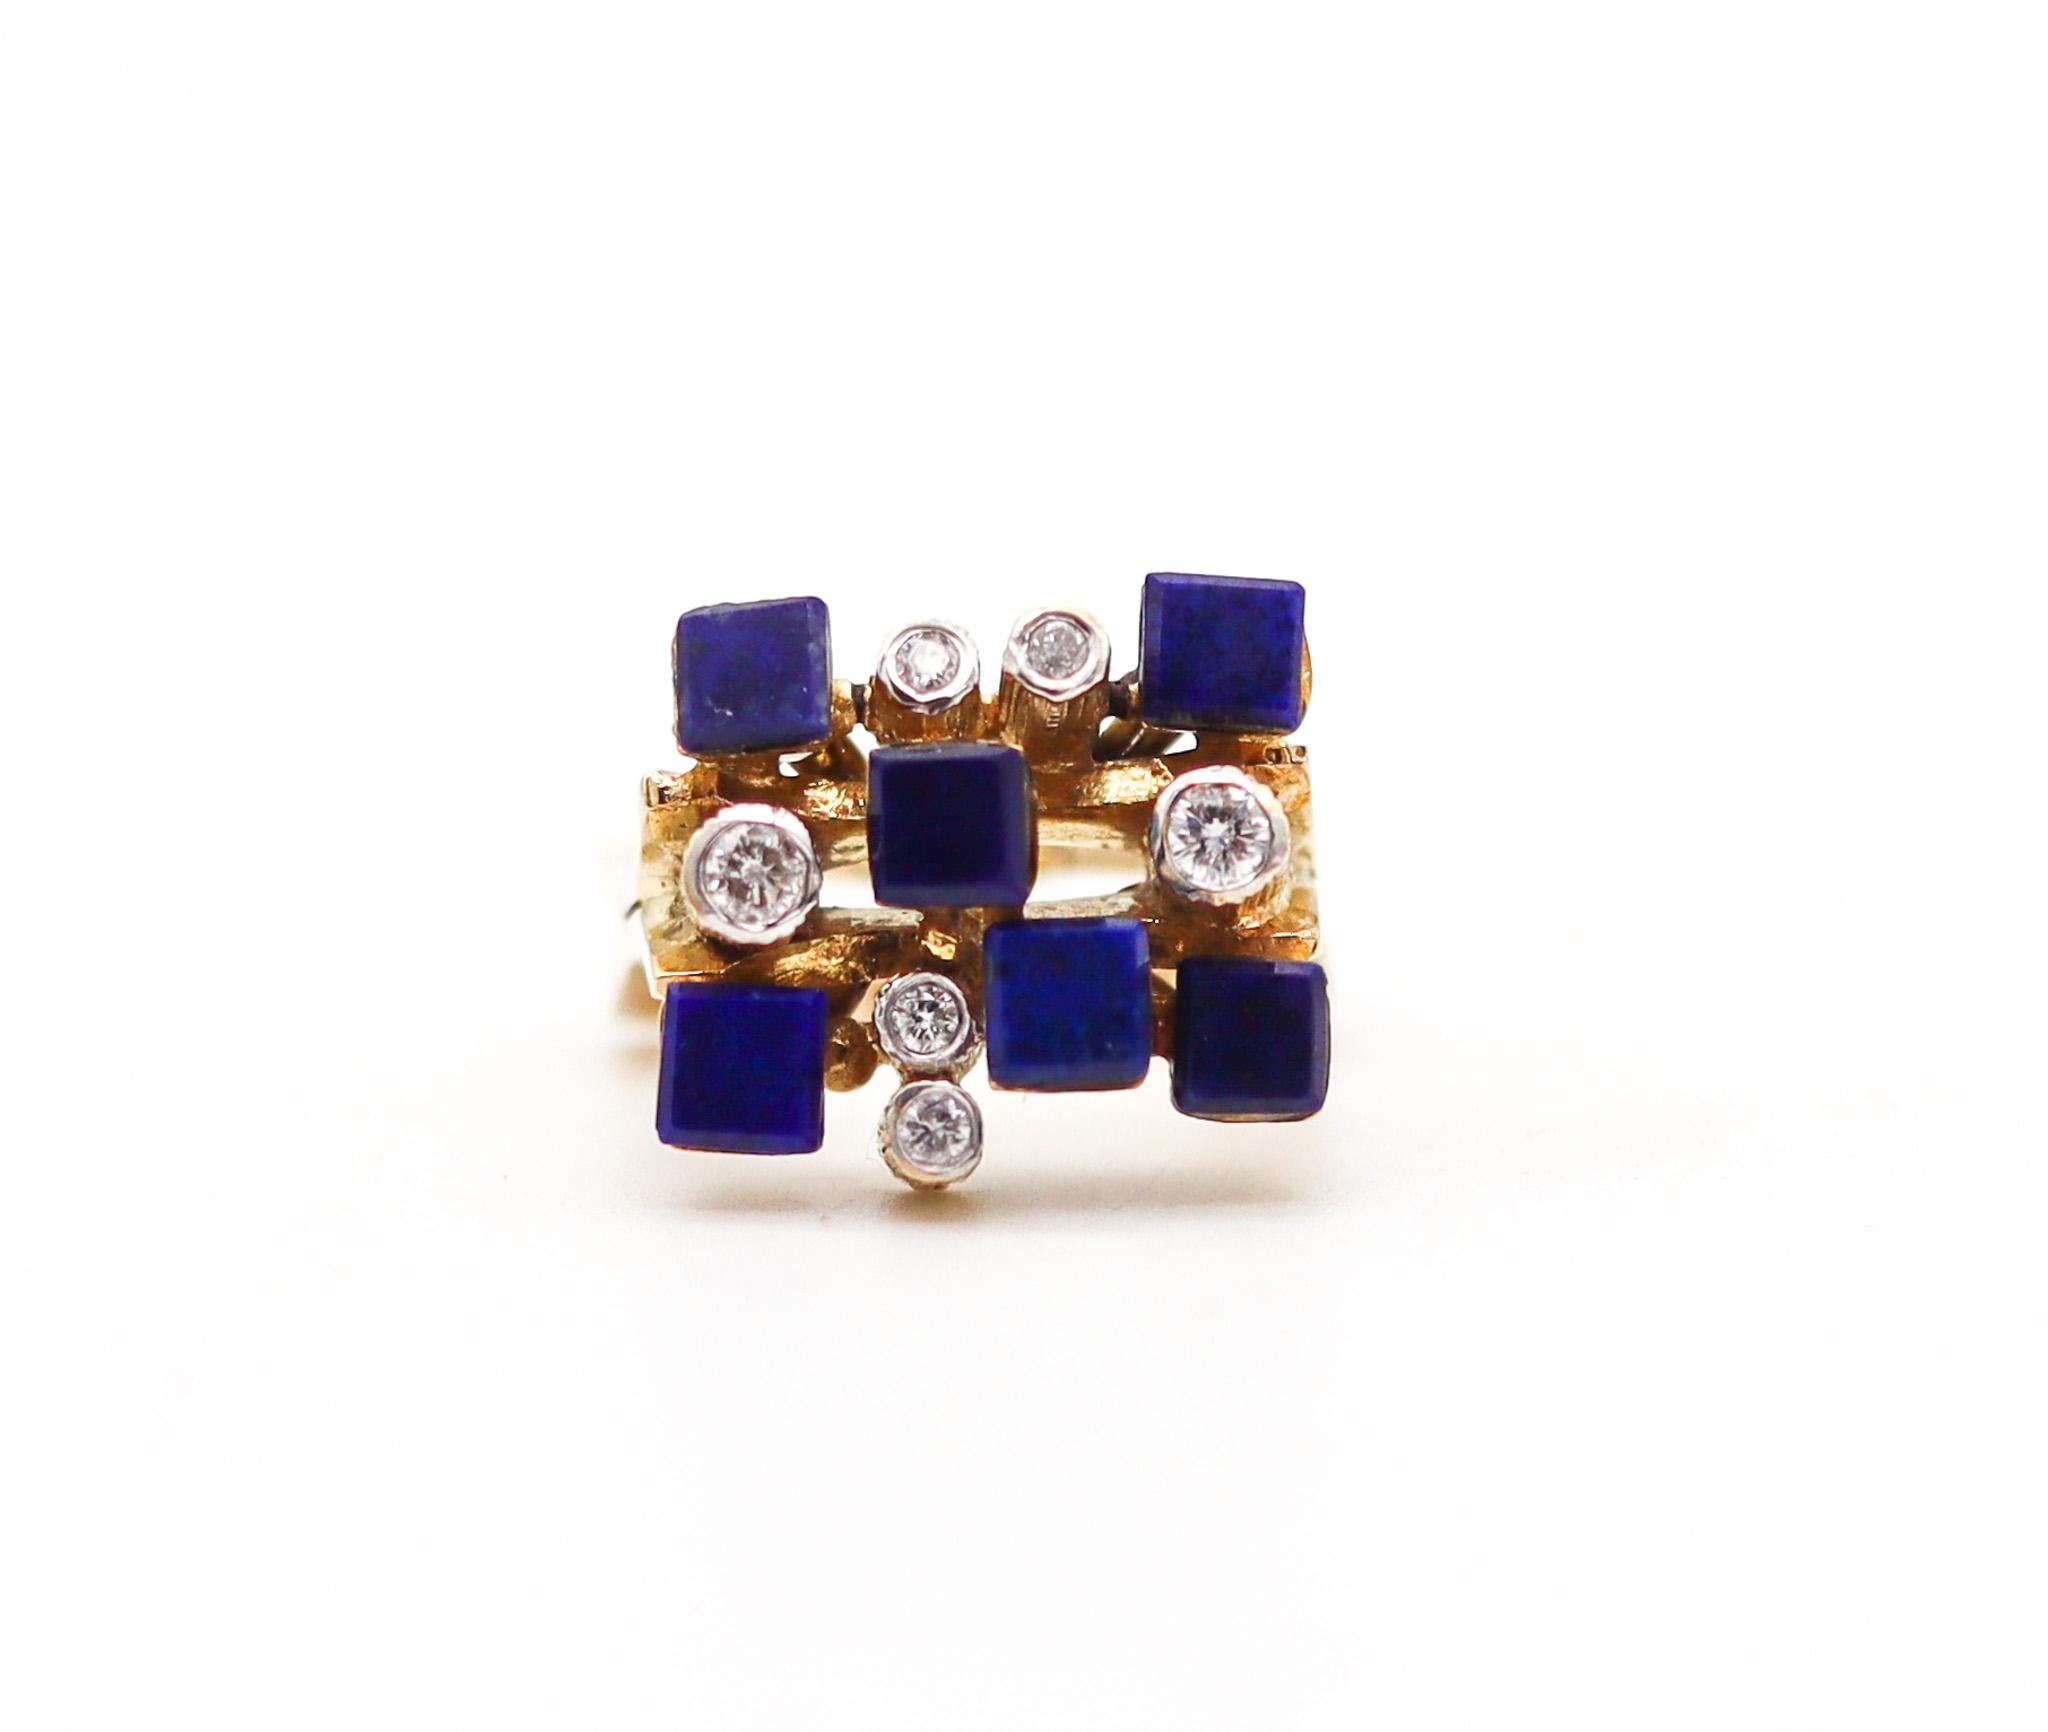 Brilliant Cut Danish 1970 Geometric Ring In 14Kt Yellow Gold With Diamonds And Lapis Lazuli For Sale